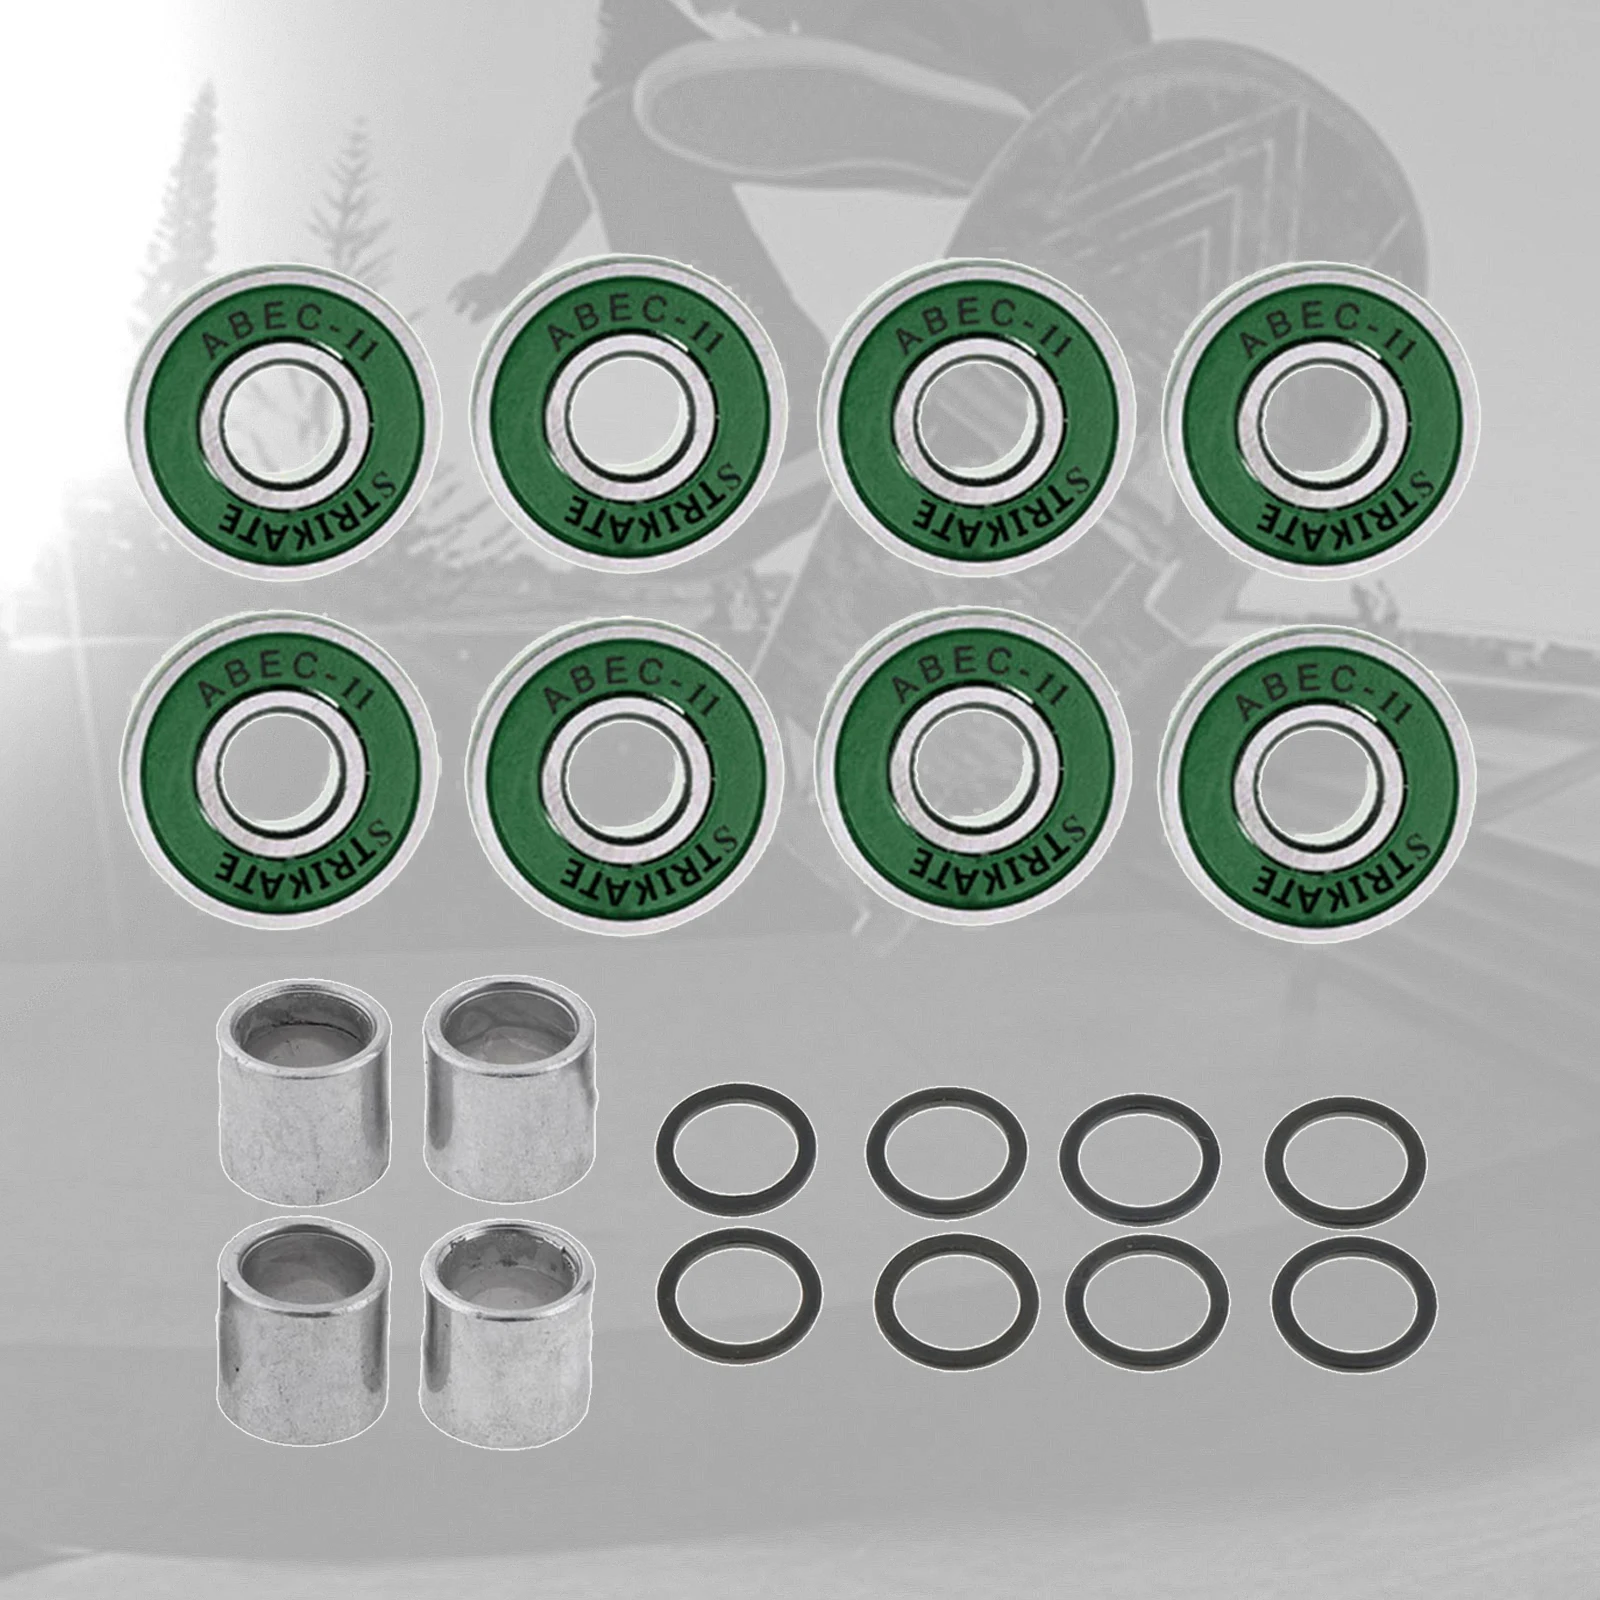 8 Pcs 608RS-ABEC 11 Bearings with Spaces and Speed Washers Set High Performance Roller Skate Scooter Skateboard